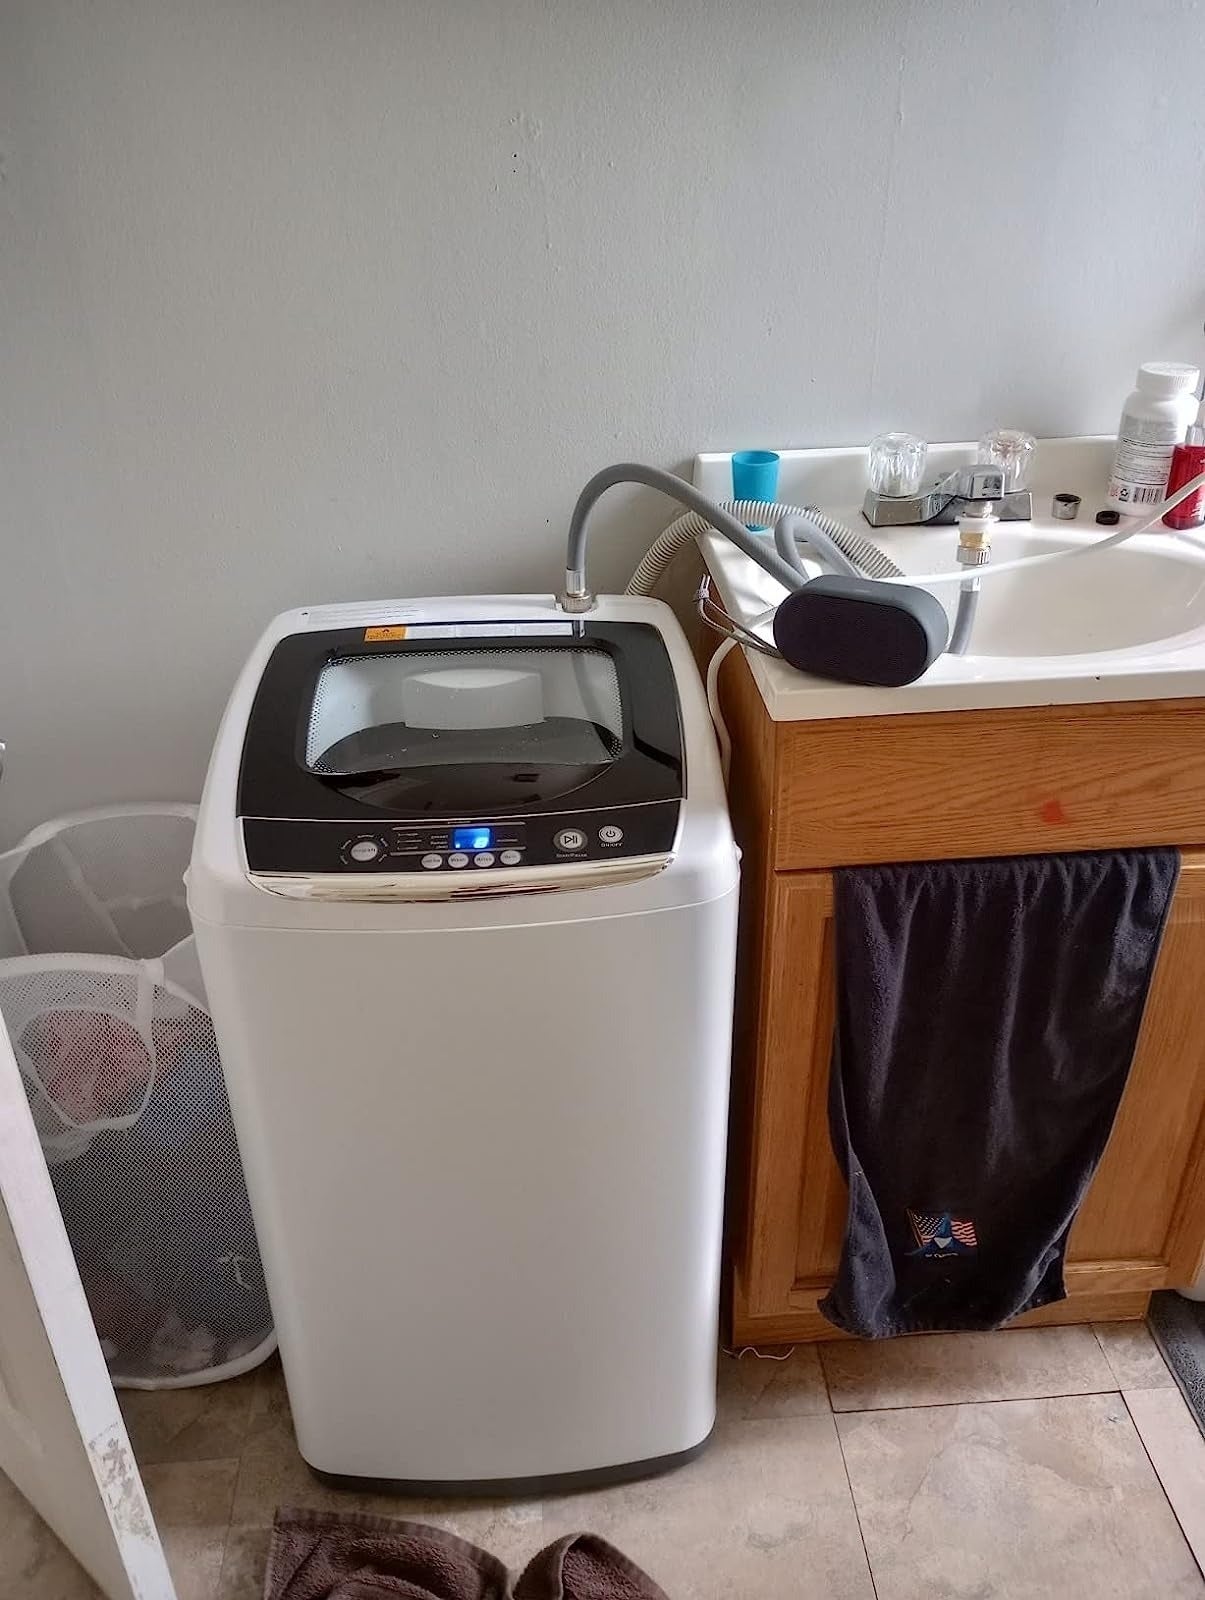 Top Portable Washing Machines on : Reviews and Ratings